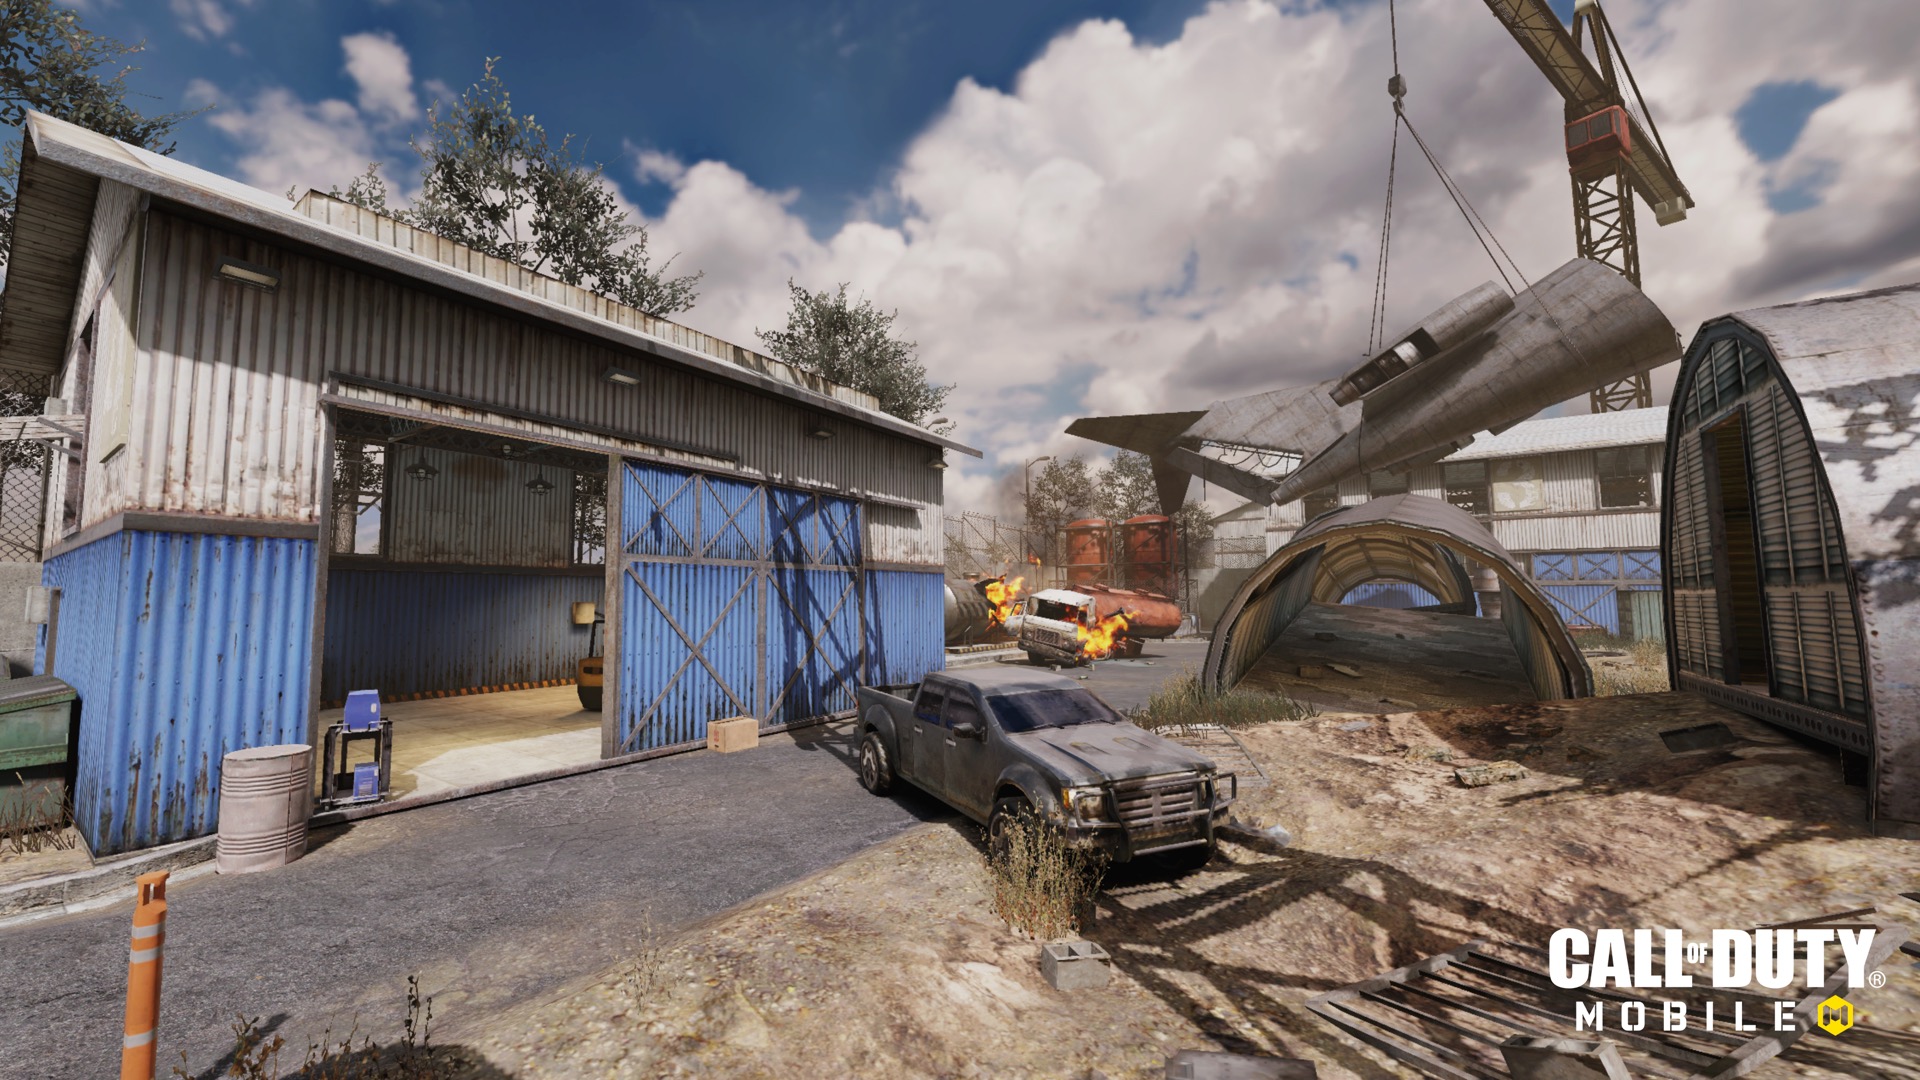 call of duty maps Call Of Duty Mobile Season 3 Teasers Reveal New Maps And Modes